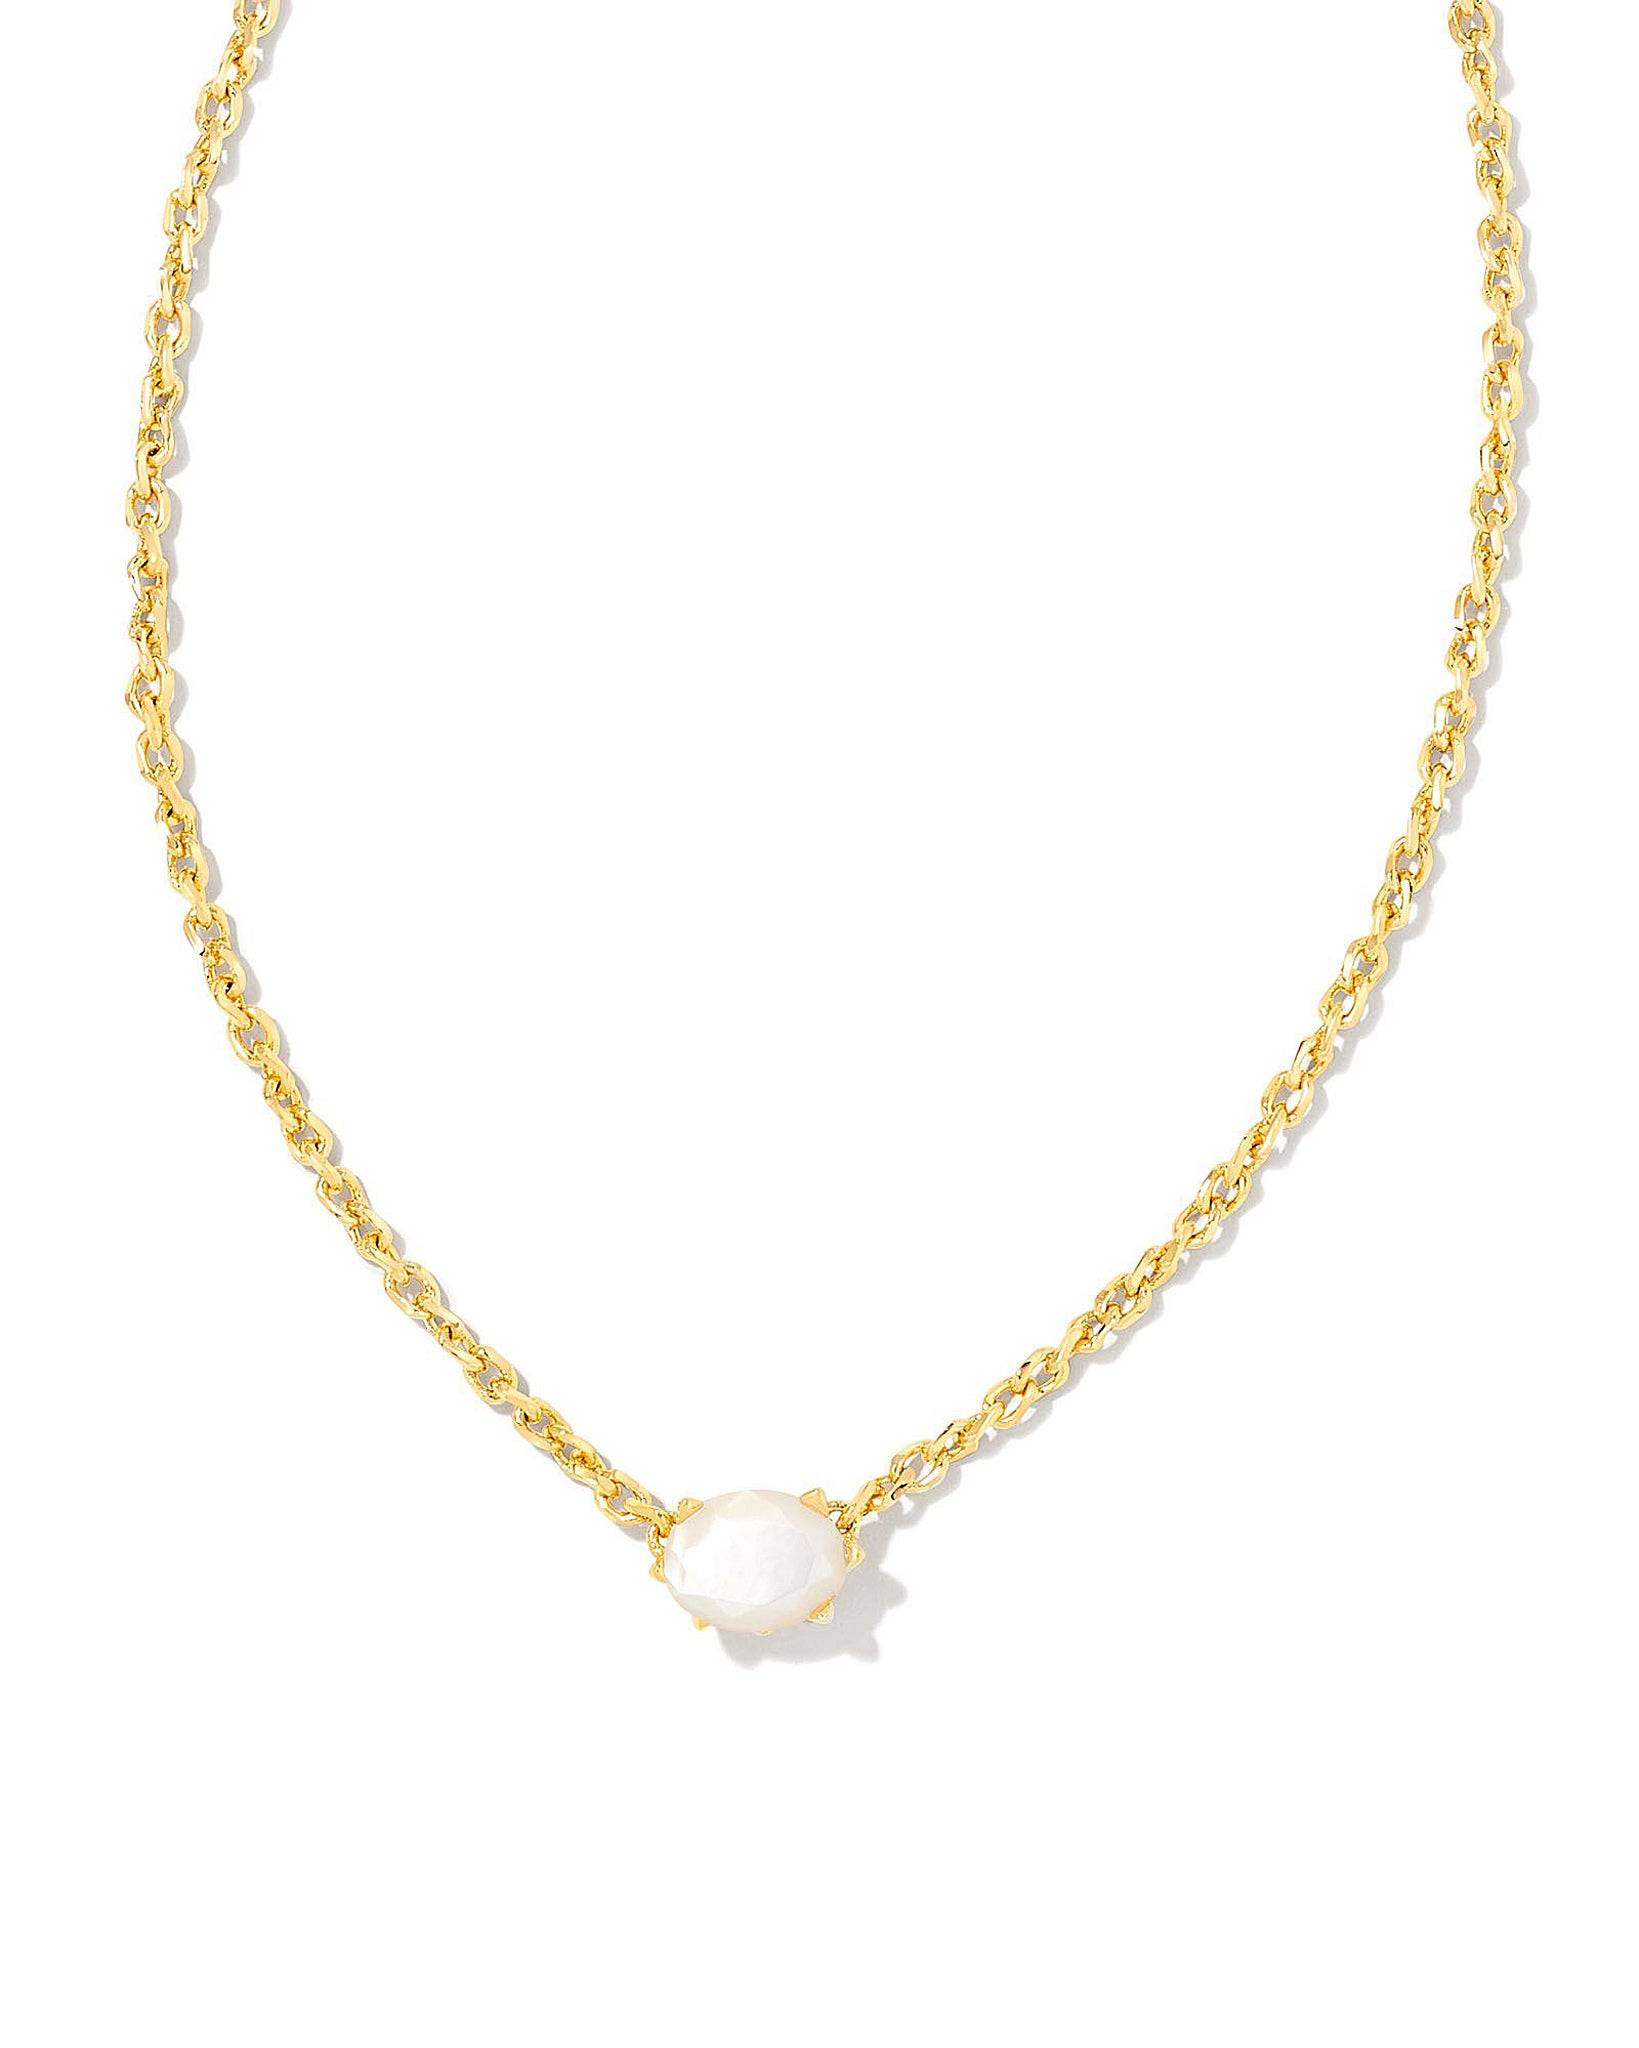 Kendra Scott Cailin Oval Pendant Necklace in Ivory Mother of Pearl and Gold